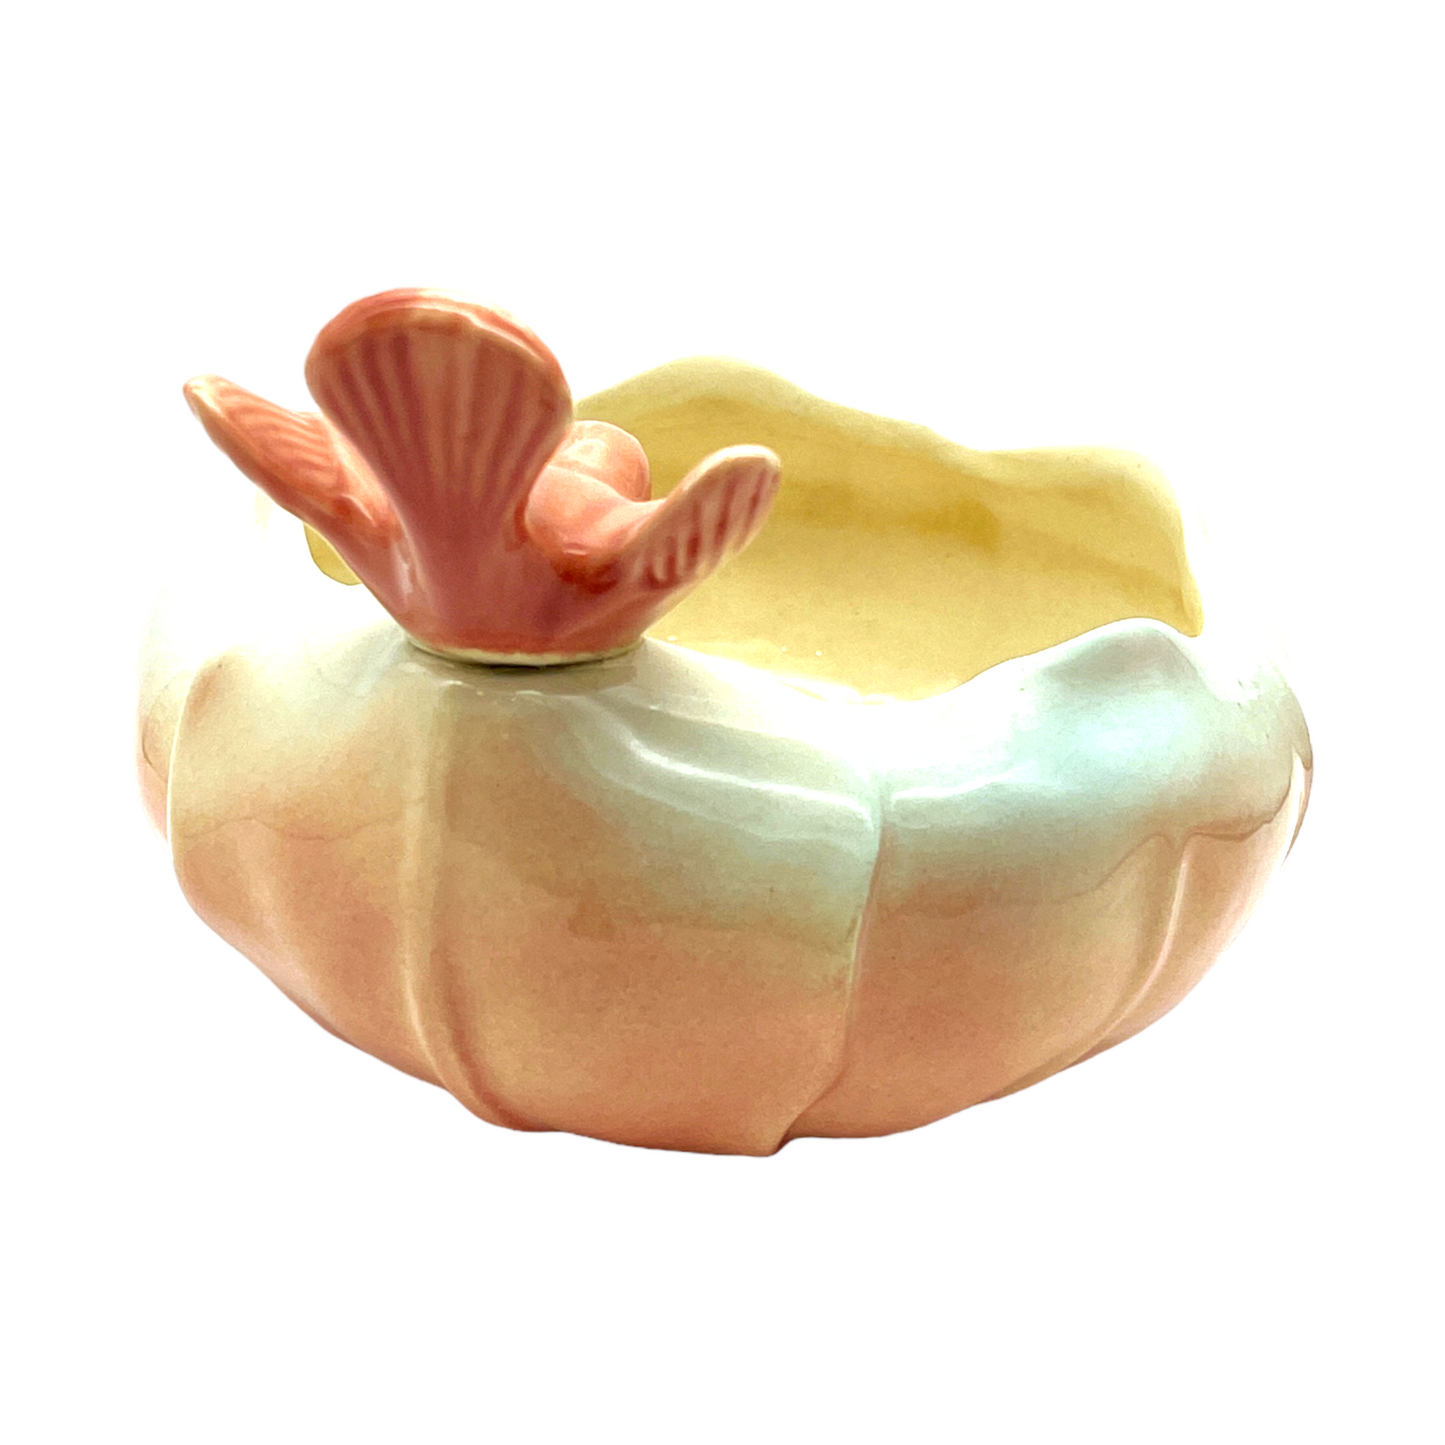 Royal Copley - Perched Bird On Small Bowl - 4"